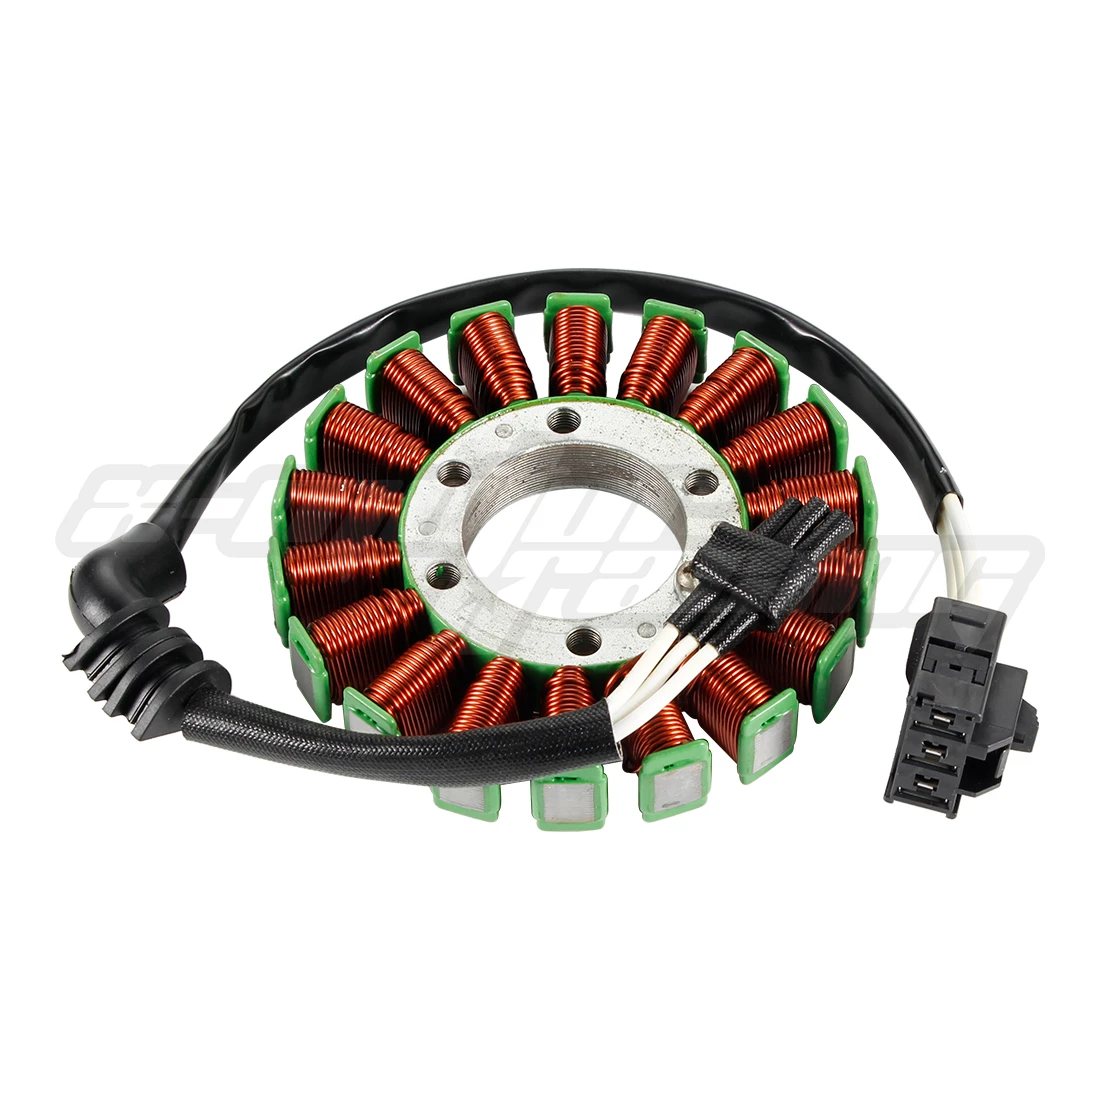 Motorcycle Generator Magneto Stator Coil For Yamaha YZF R6 2006-2016 2C0-81410-00-00 2C0-81410-01-00